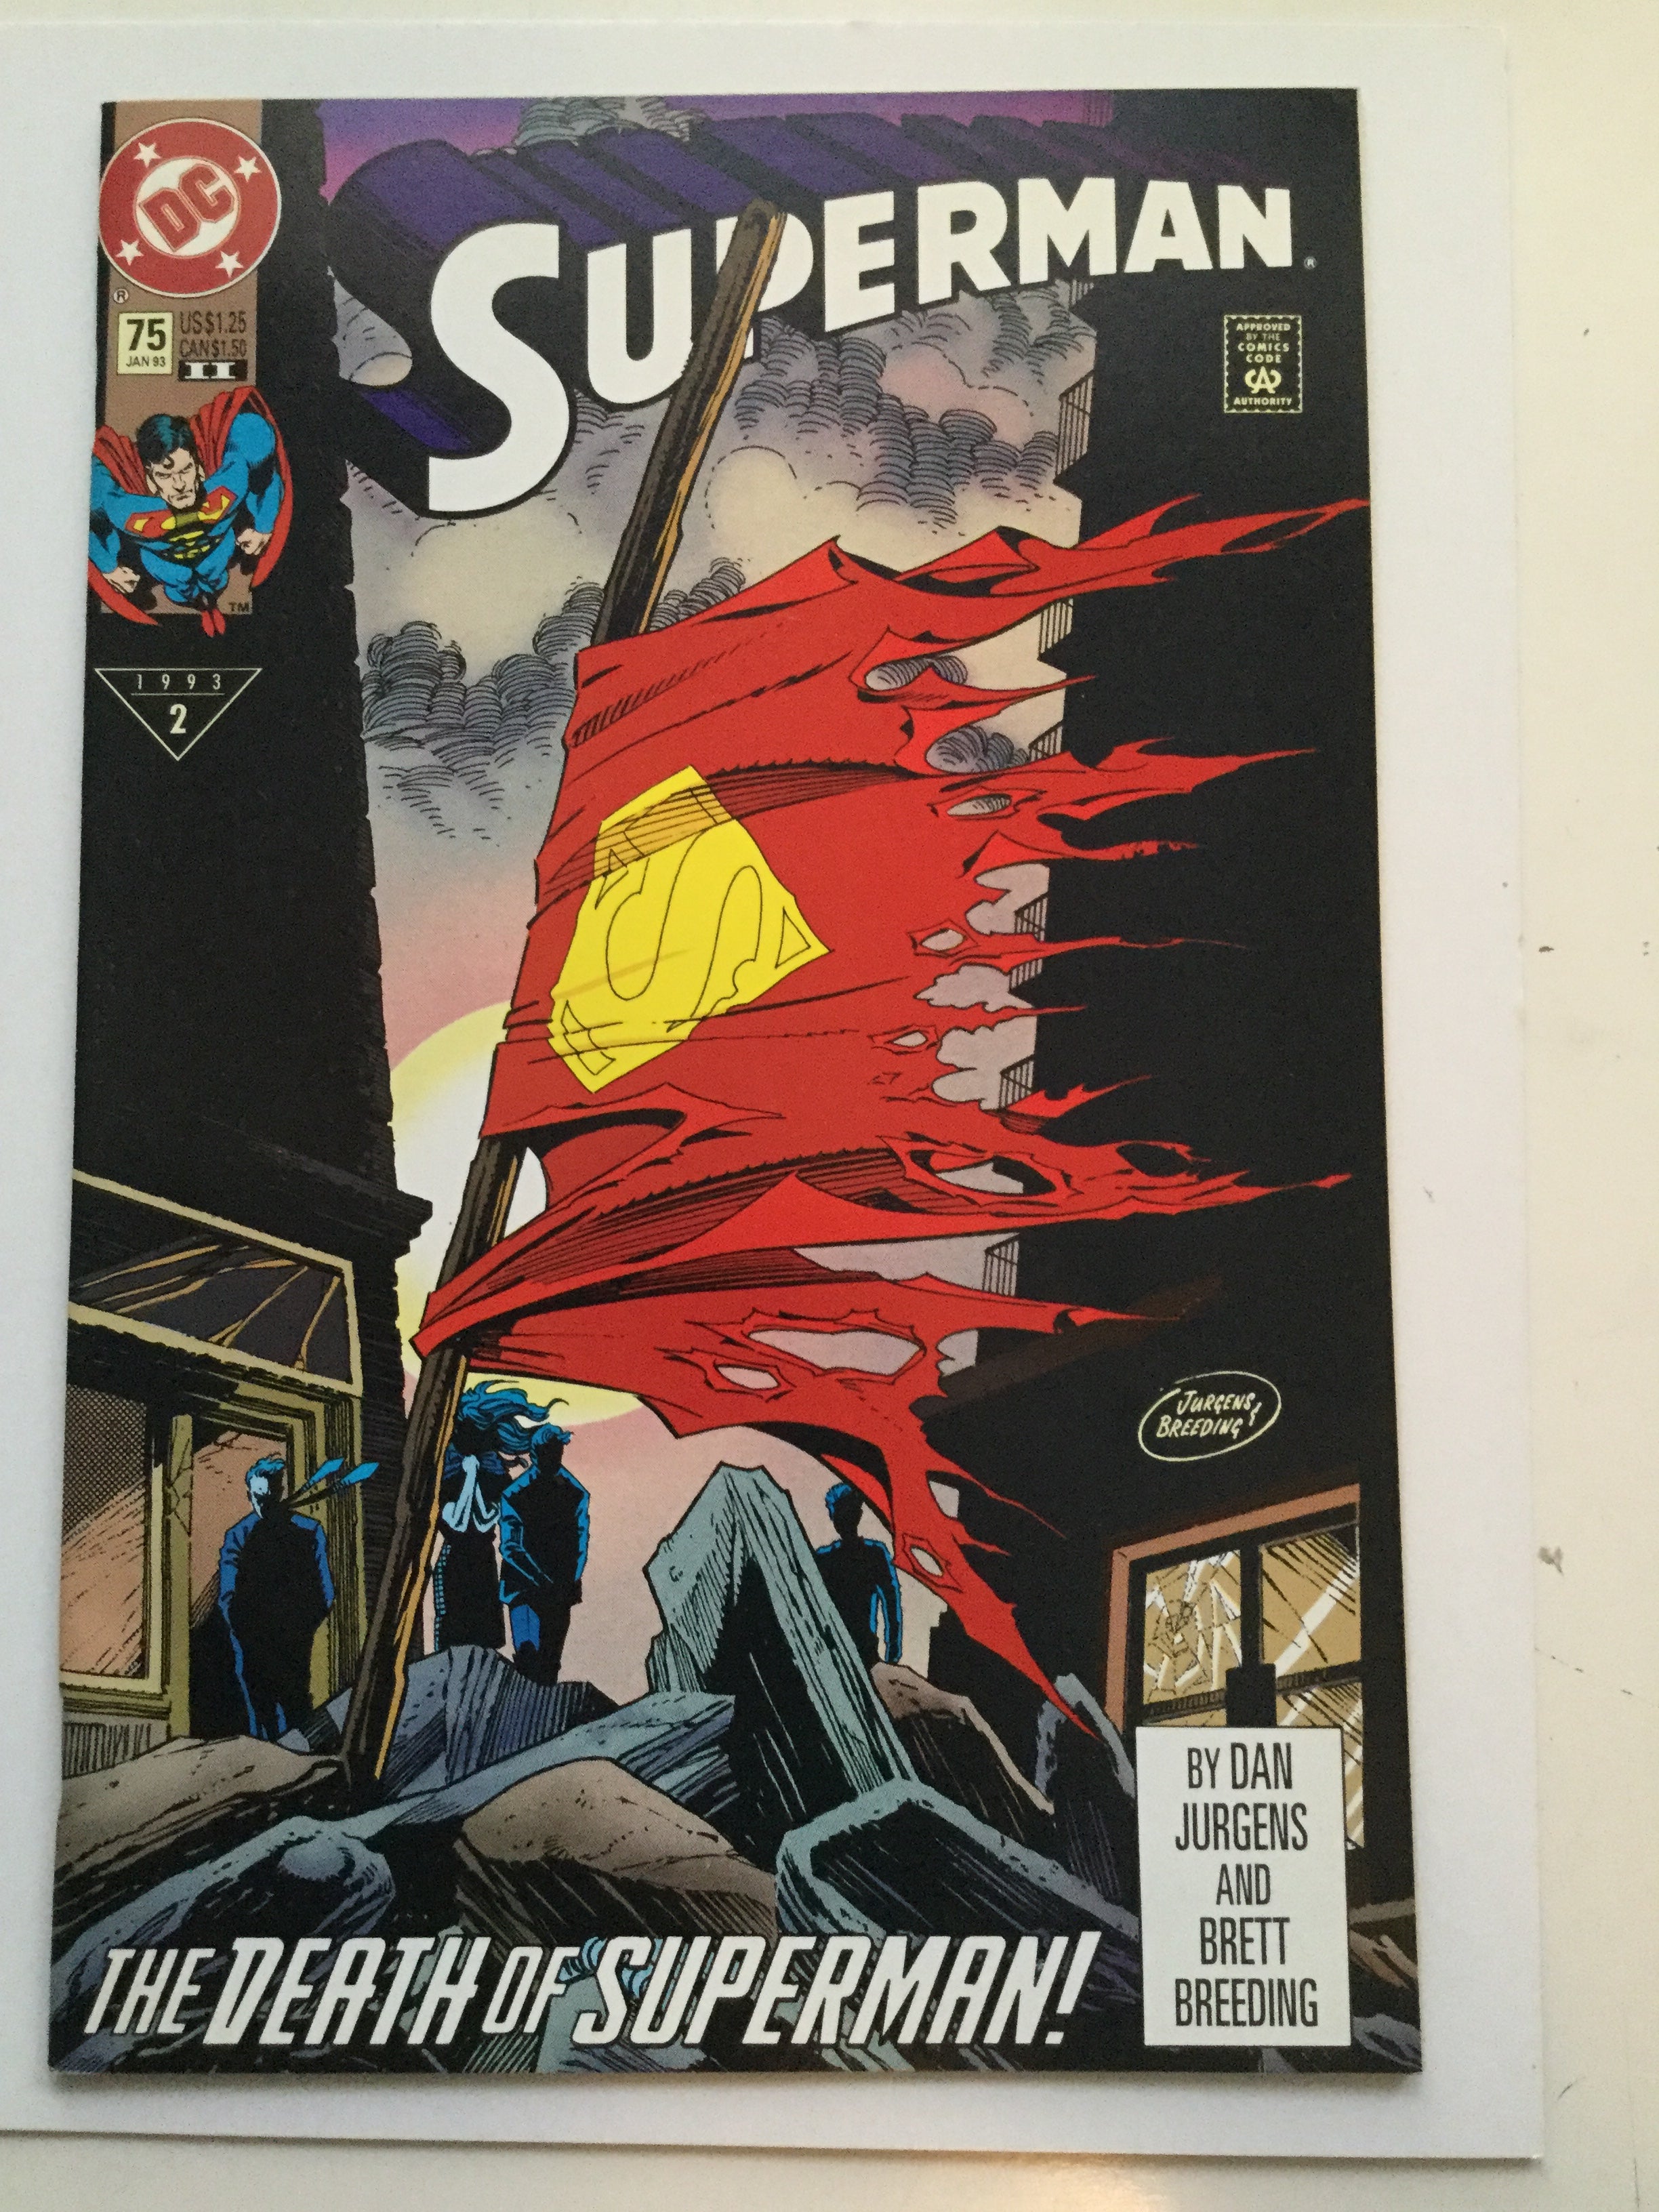 Death of Superman issue comic book